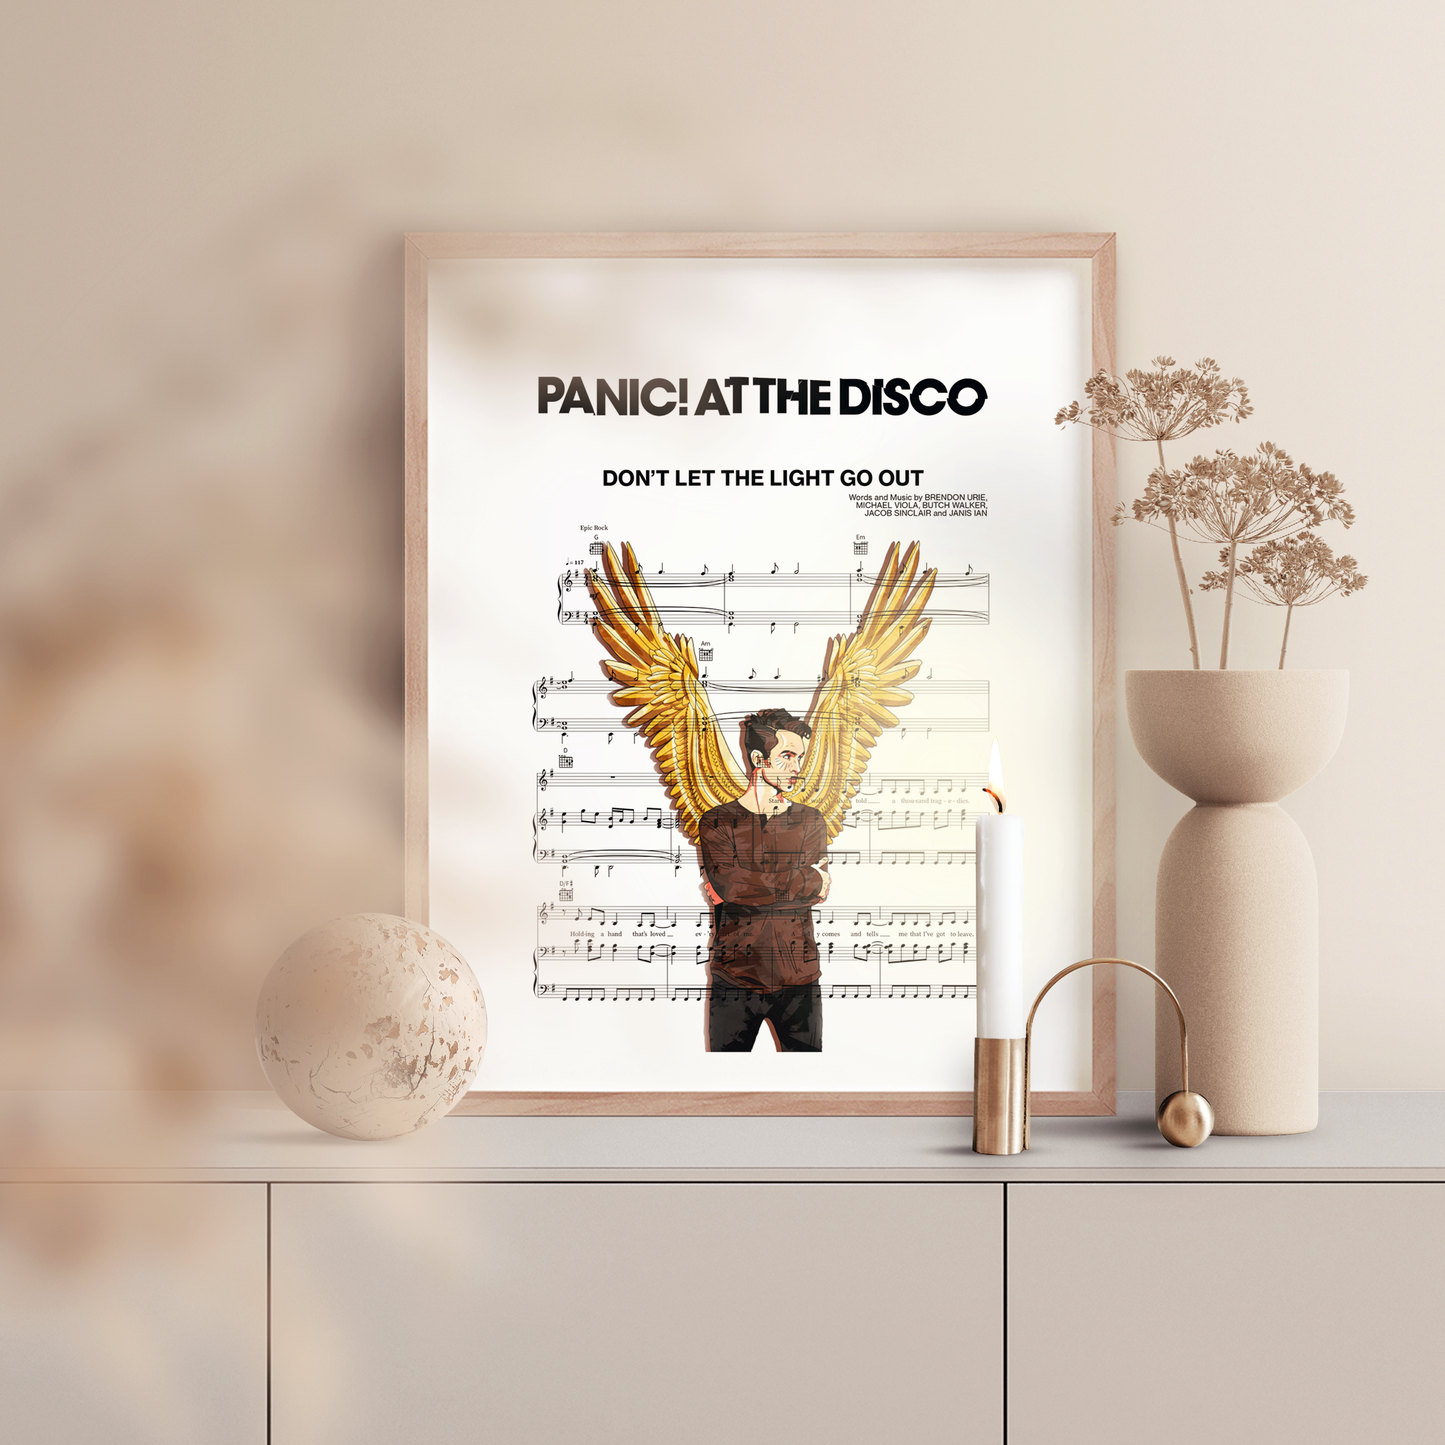 Brighten up any room with this Panic at the Disco - DON’T LET THE LIGHT GO OUT Poster. Featuring song lyrics on a custom-made poster, it will make a great addition to any music fan's home or office. Printed on high quality stock with precise details and vibrant colors, and perfect for a first dance anniversary. Add this unique piece of wall art to your collection now.